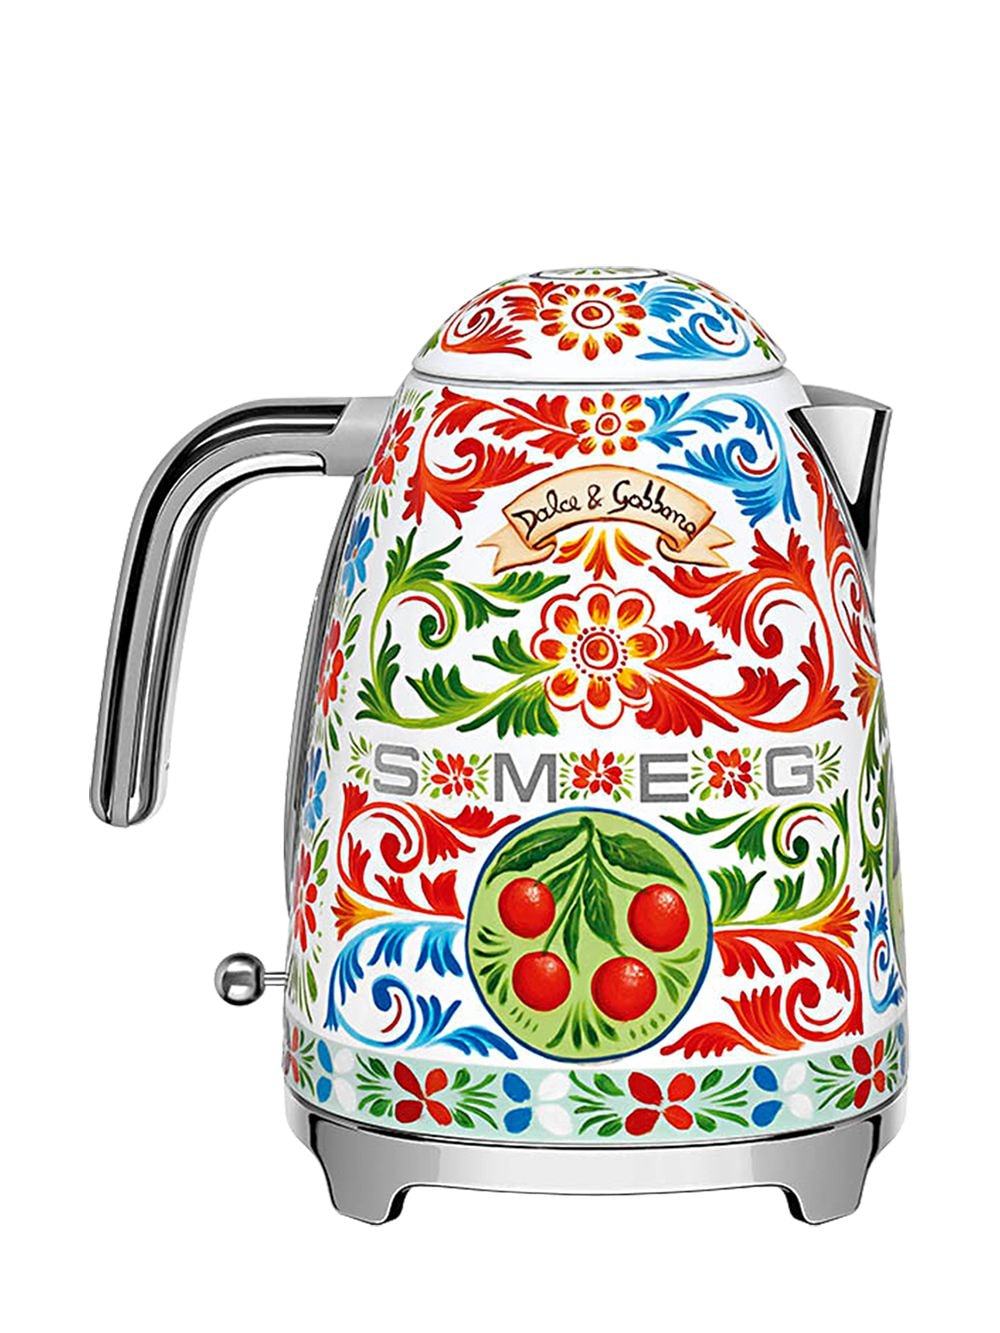 Smeg By Dolce & Gabbana Sicily Is My Love Standard Kettle In Multicolor